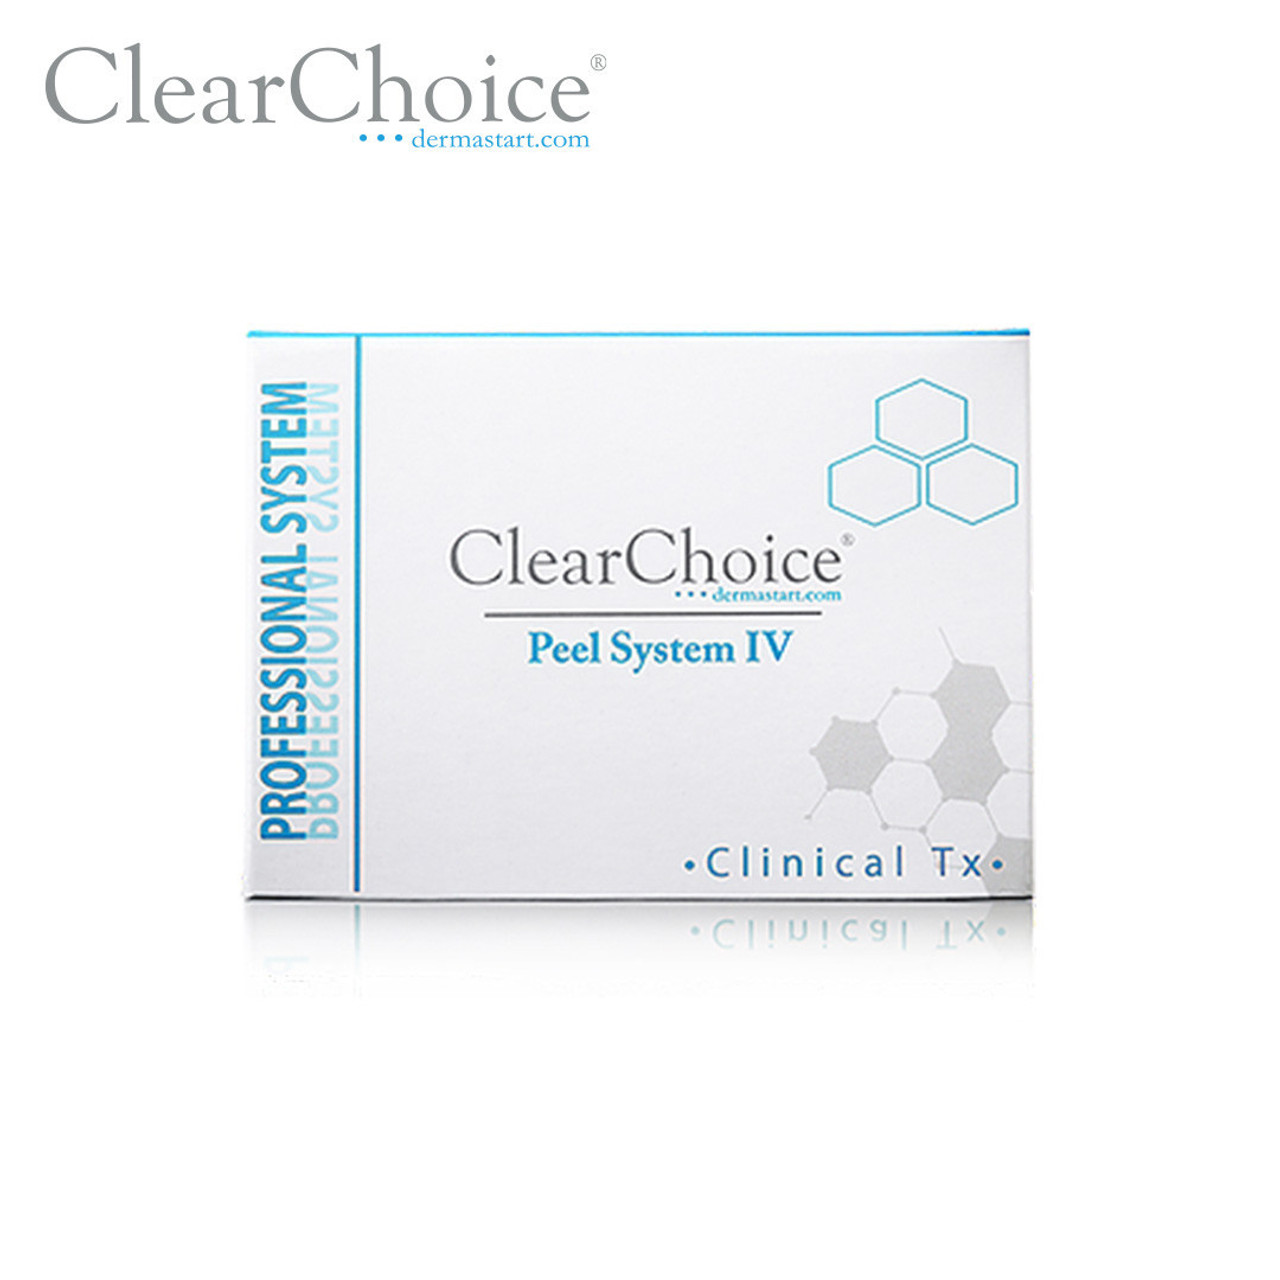 Clear Choice Peel System IV trial